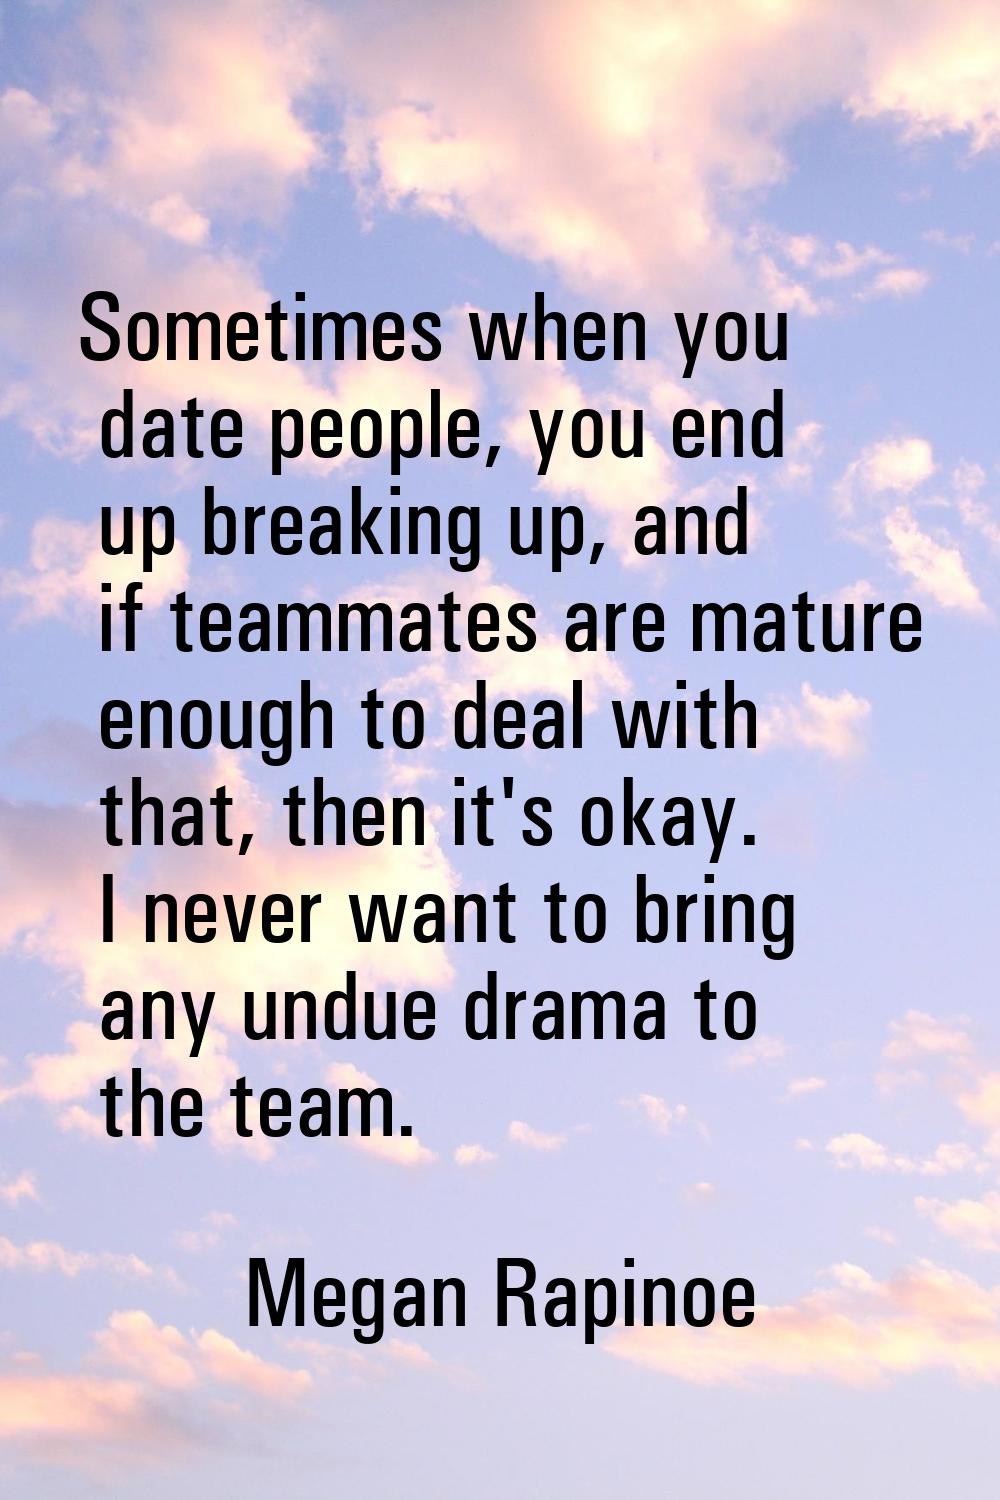 Sometimes when you date people, you end up breaking up, and if teammates are mature enough to deal 